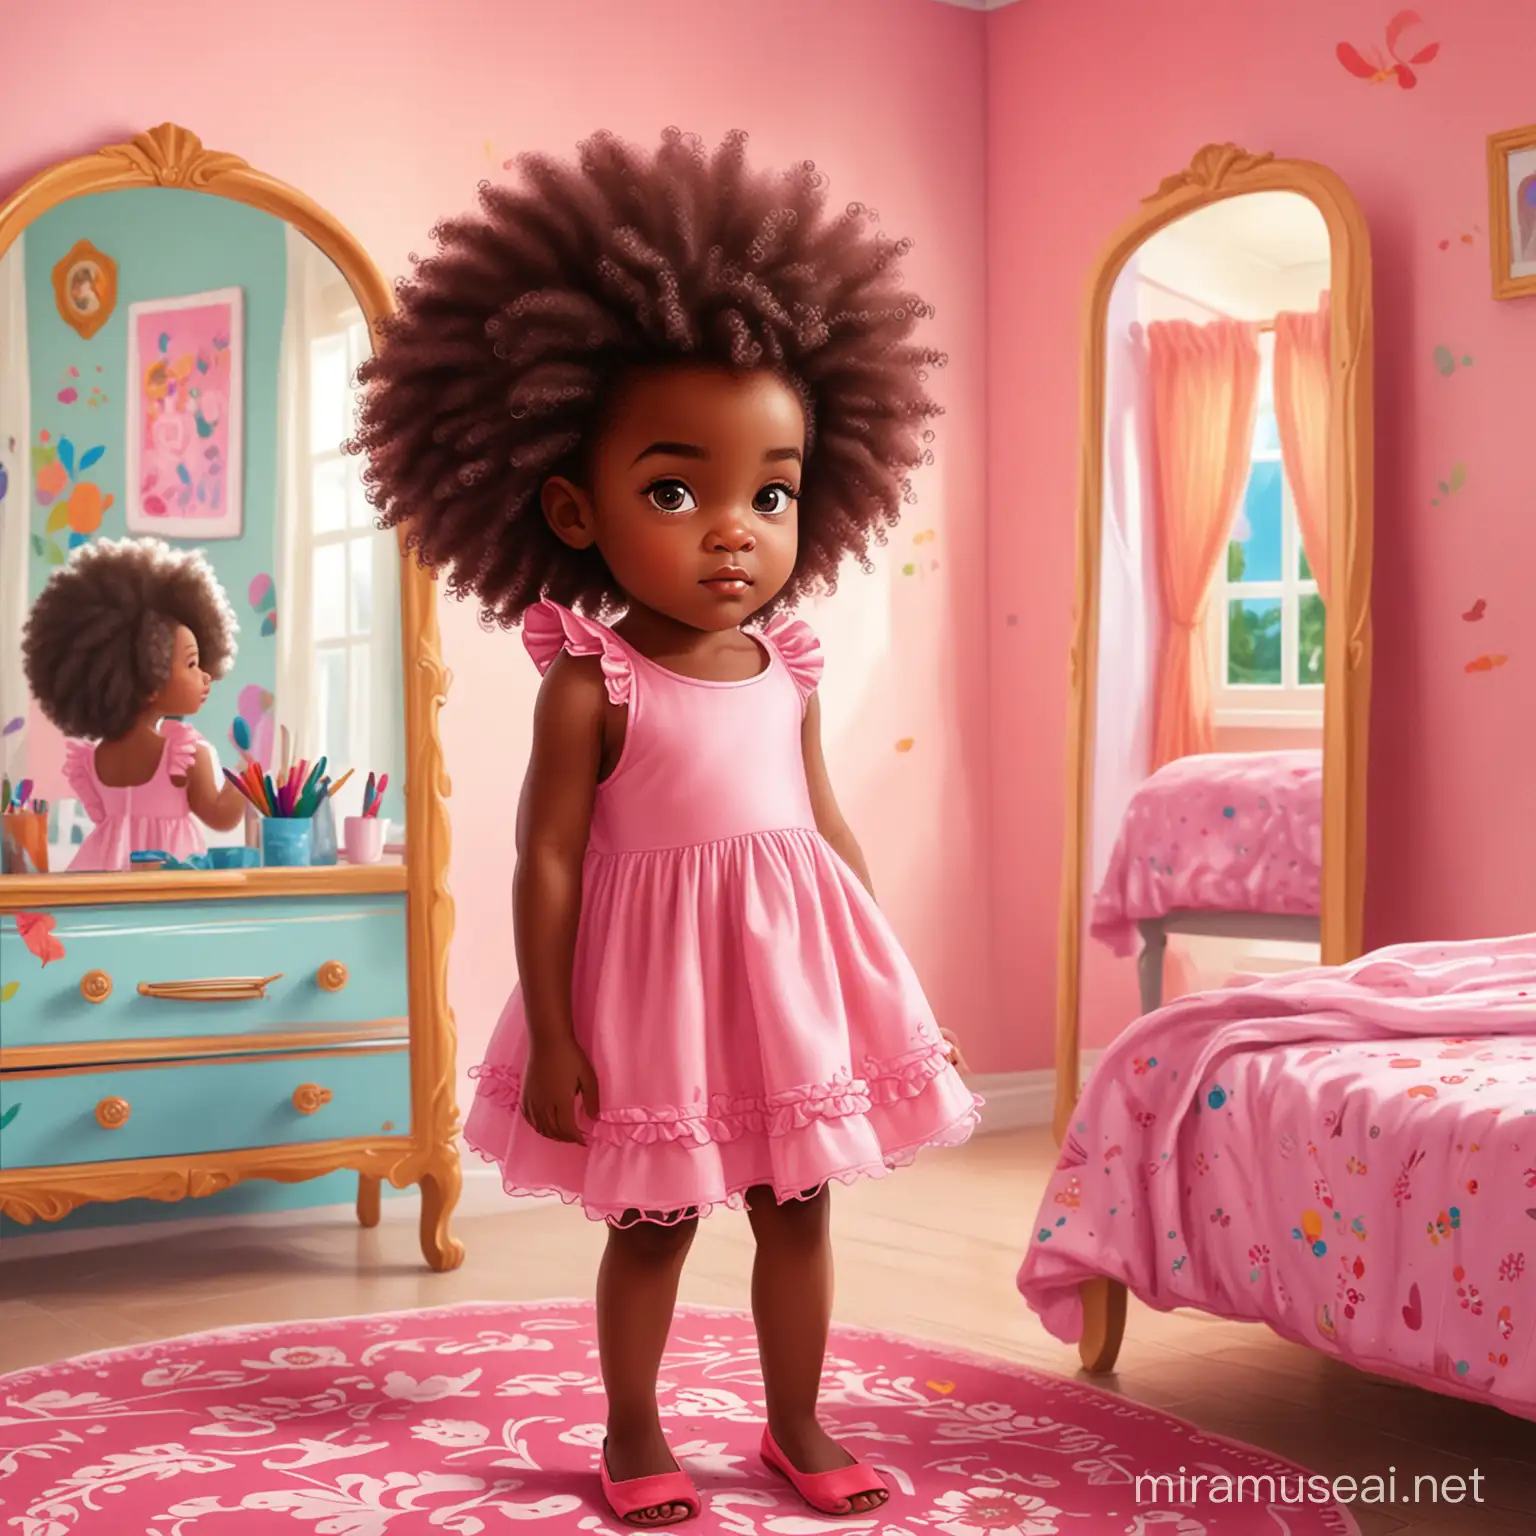 Afro Black Girl in Pink Dress Reflecting in Colorful Bedroom Childrens Book Illustration